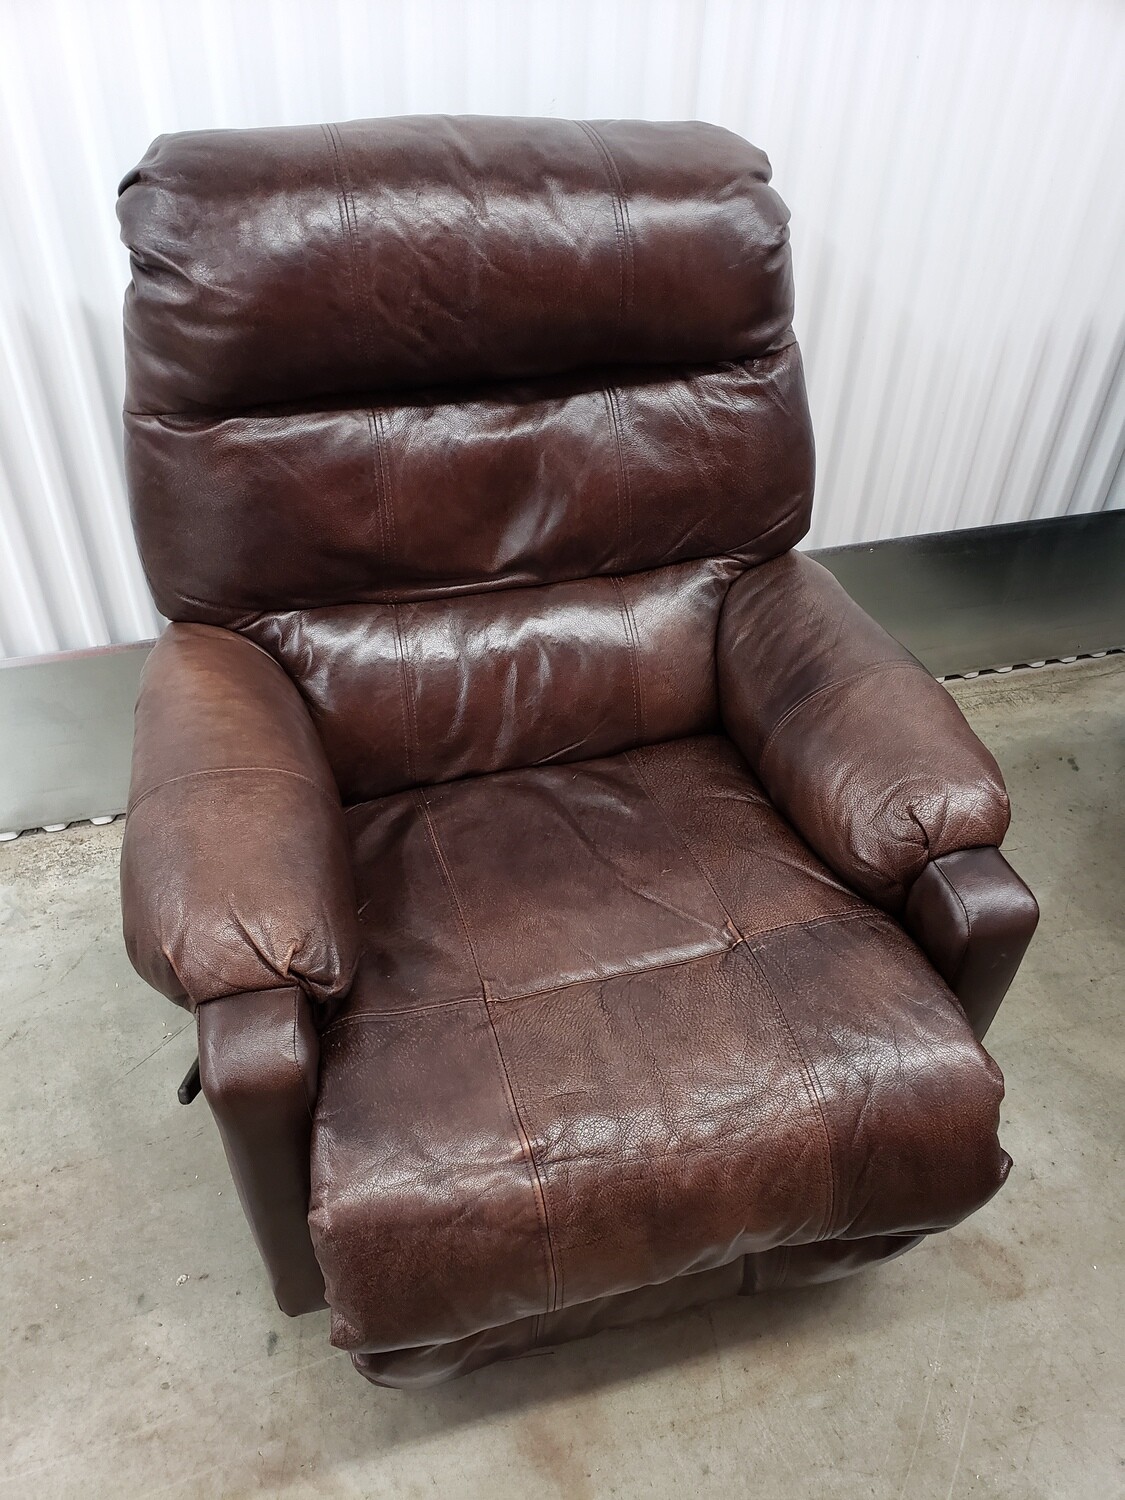 Slim Leather Recliner 32" wide #2118